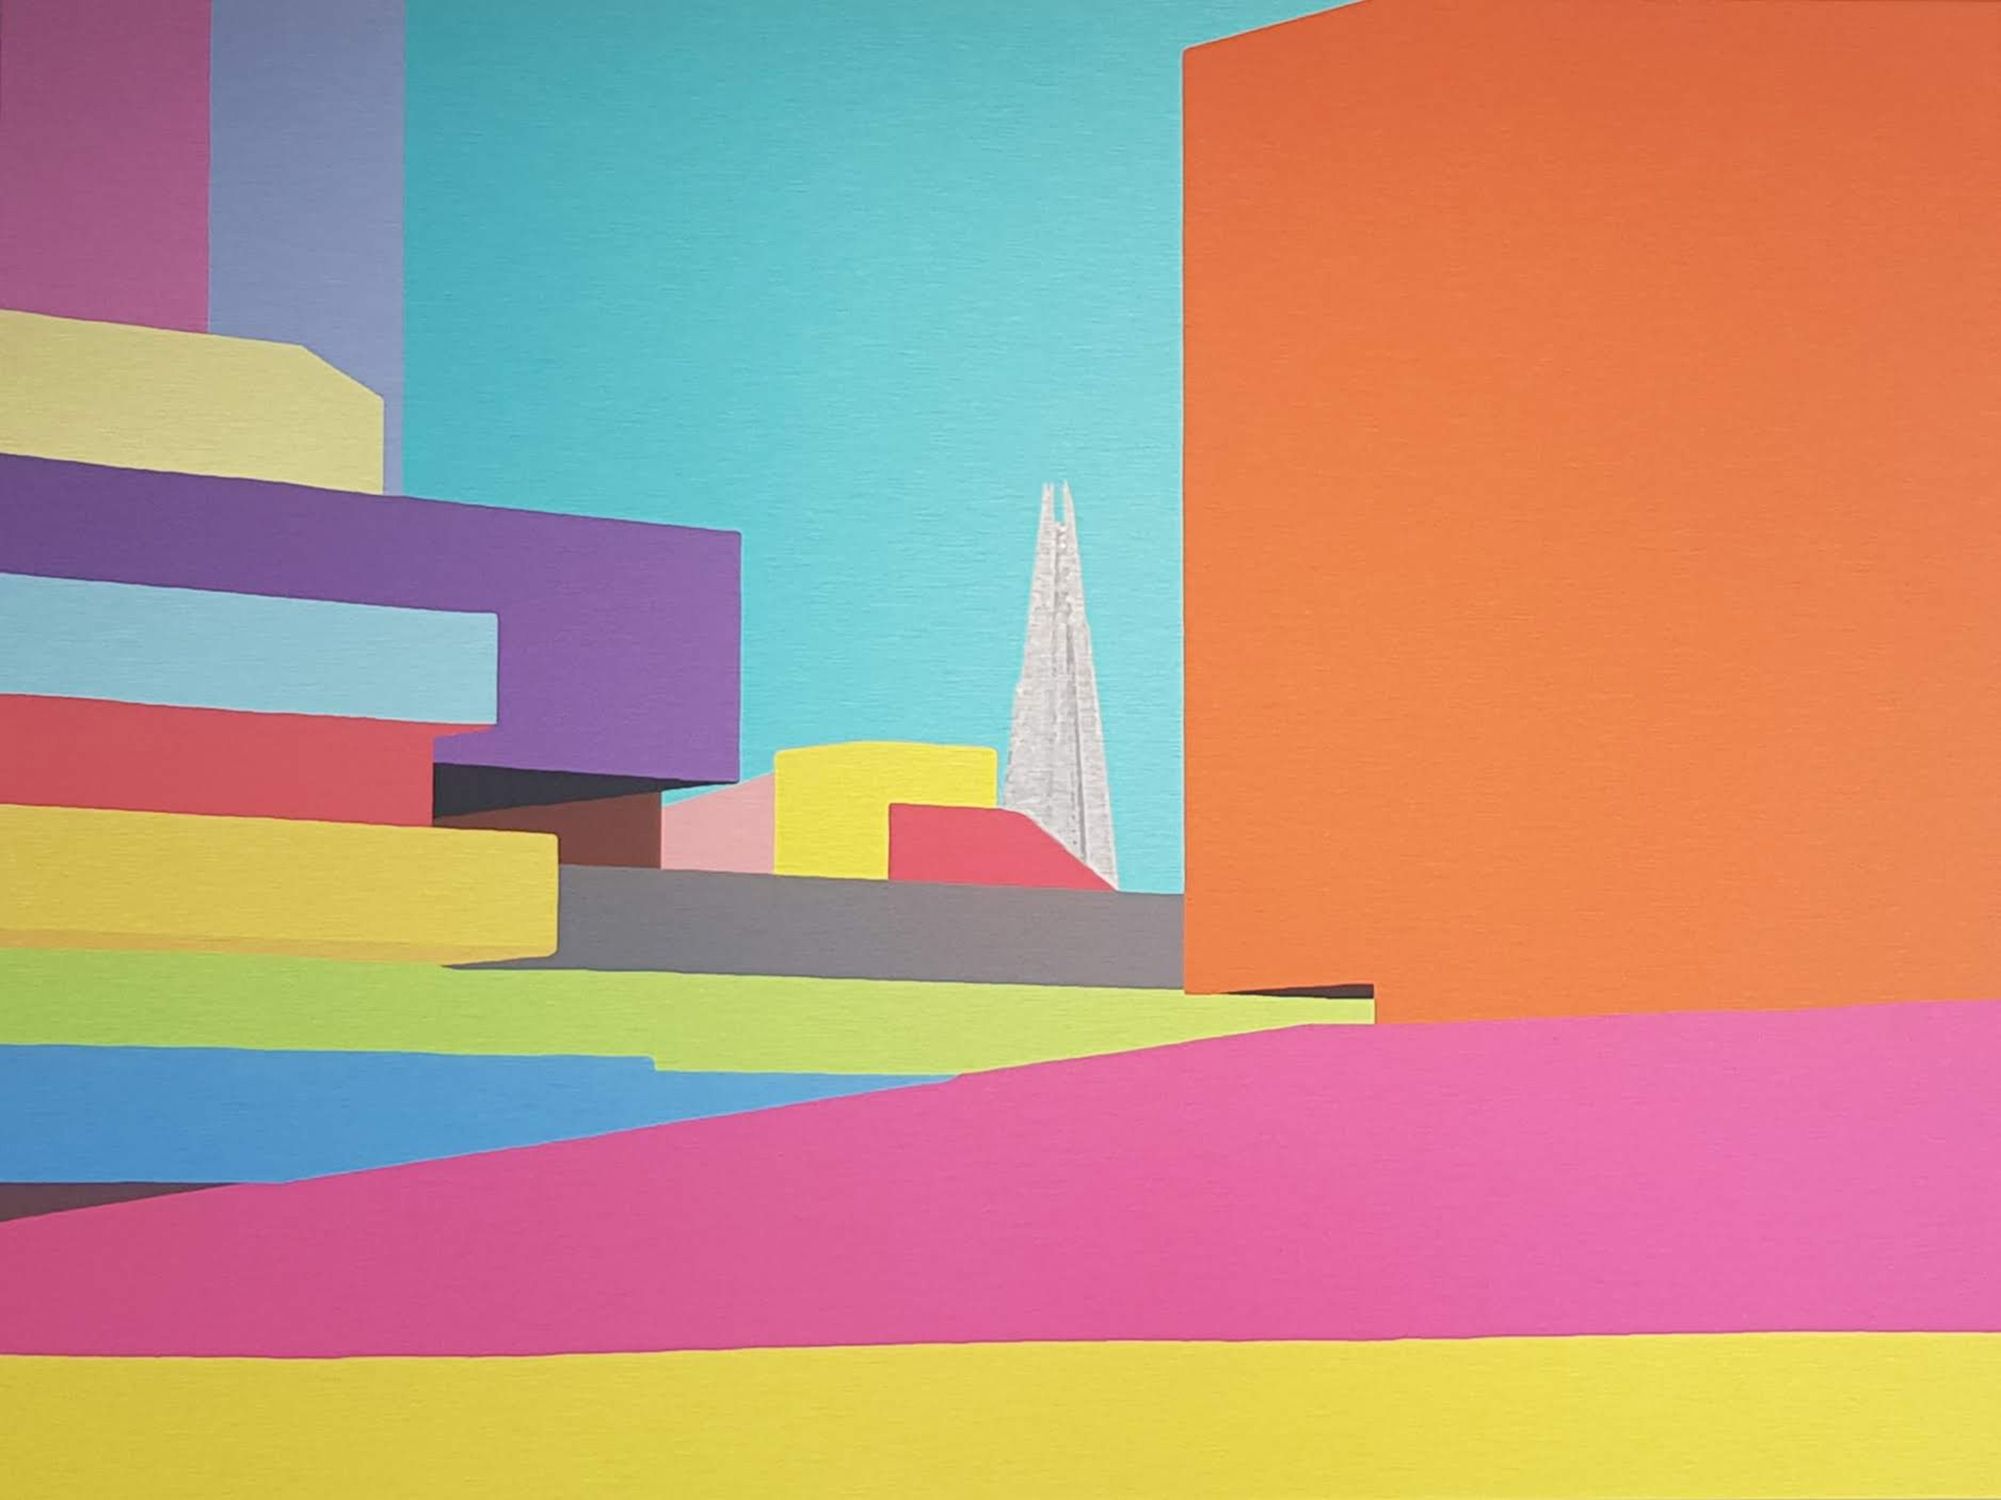 National Theatre, Colours by Michael Wallner